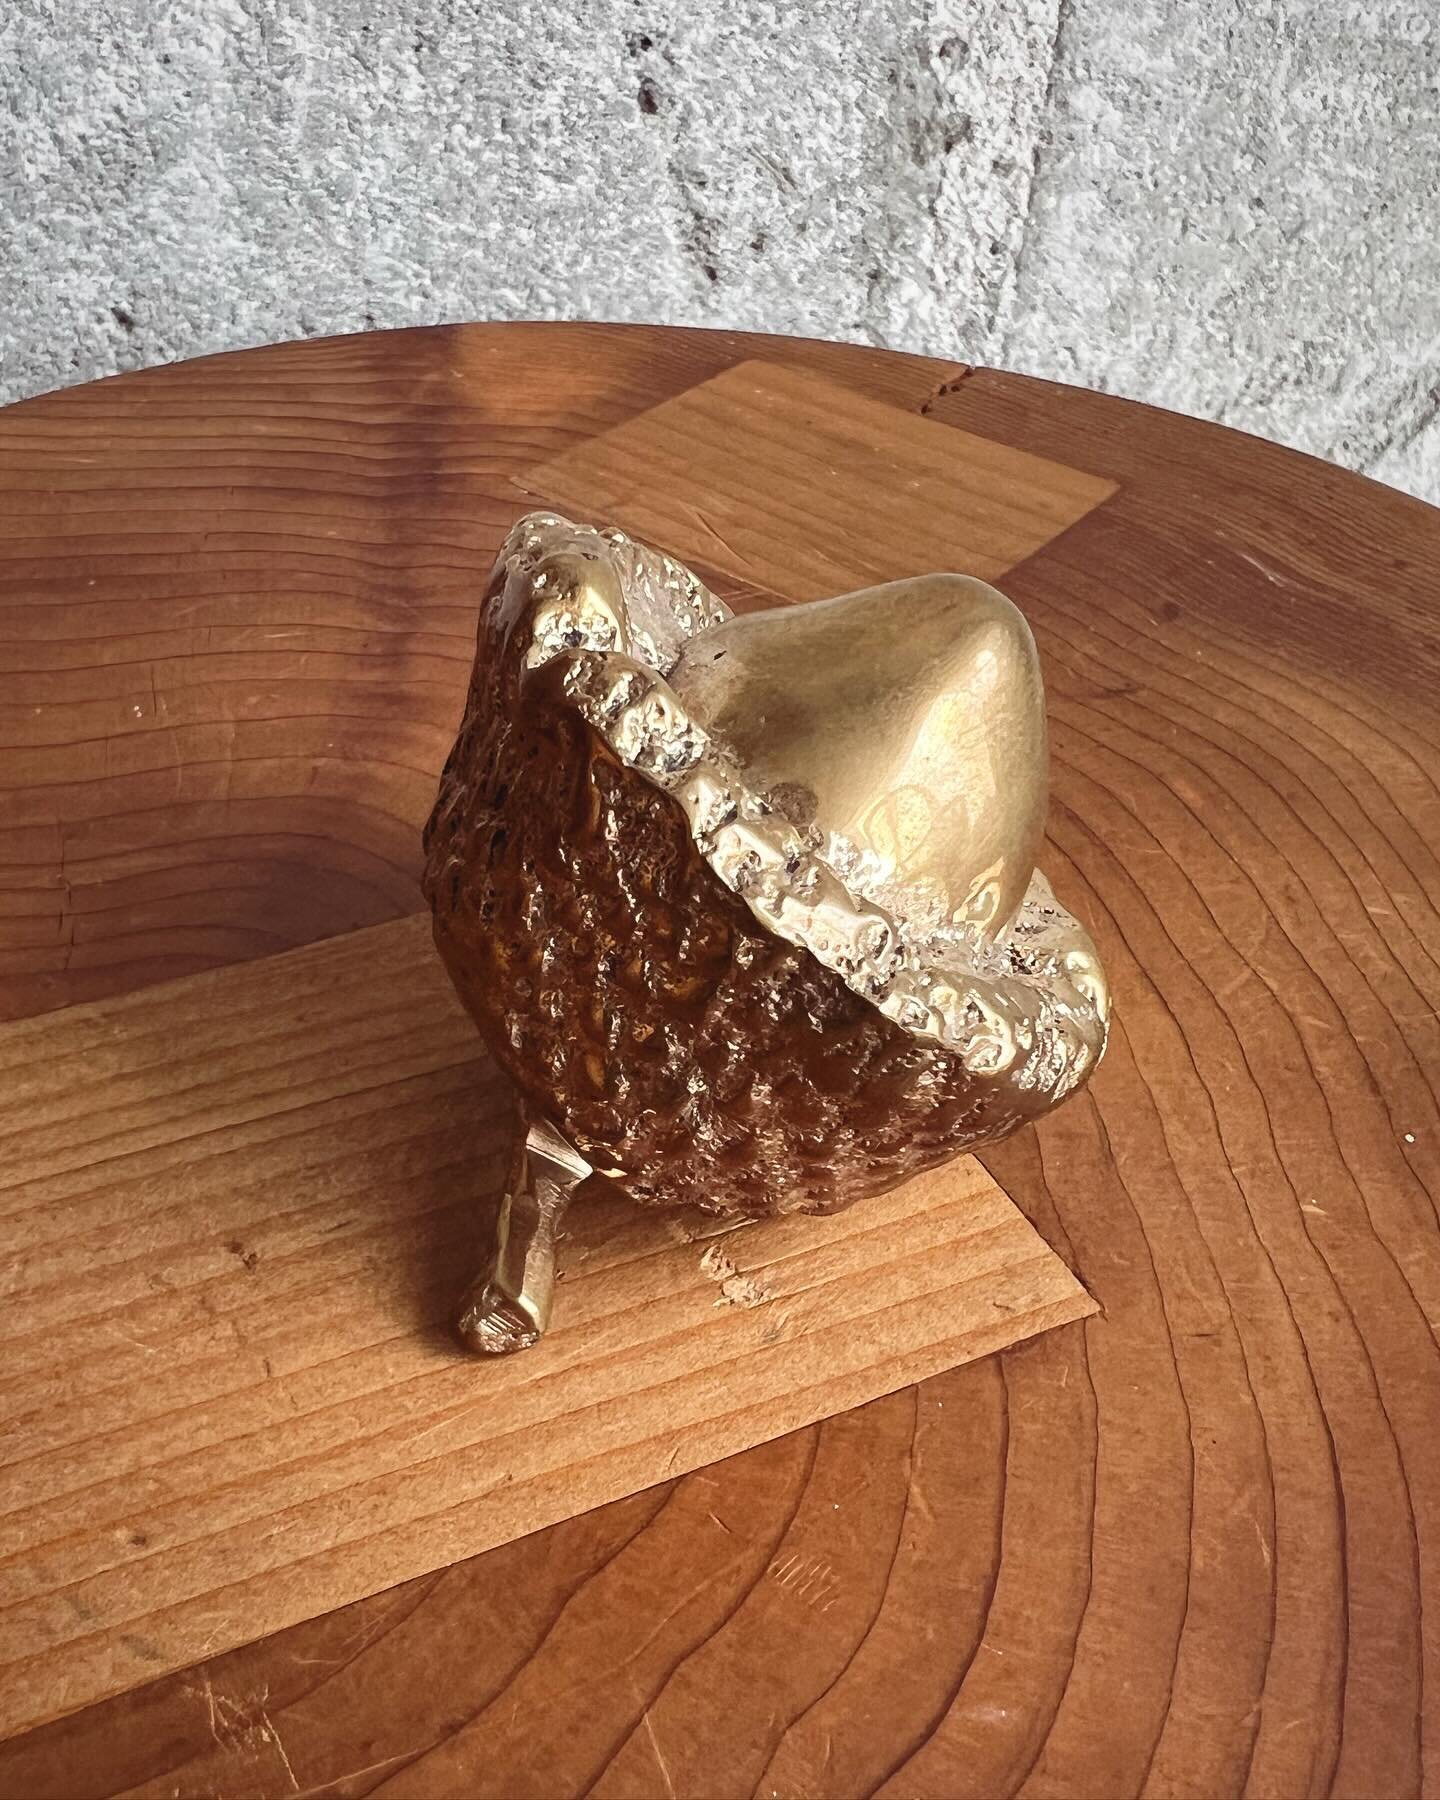 Another custom piece - the only object from nature I&rsquo;ve cast! - is this acorn for one of the lovely @blockshoptextiles sisters Hopie. The acorn was given to her by her then boyfriend from a beautiful family tree in Texas. I believe they were la